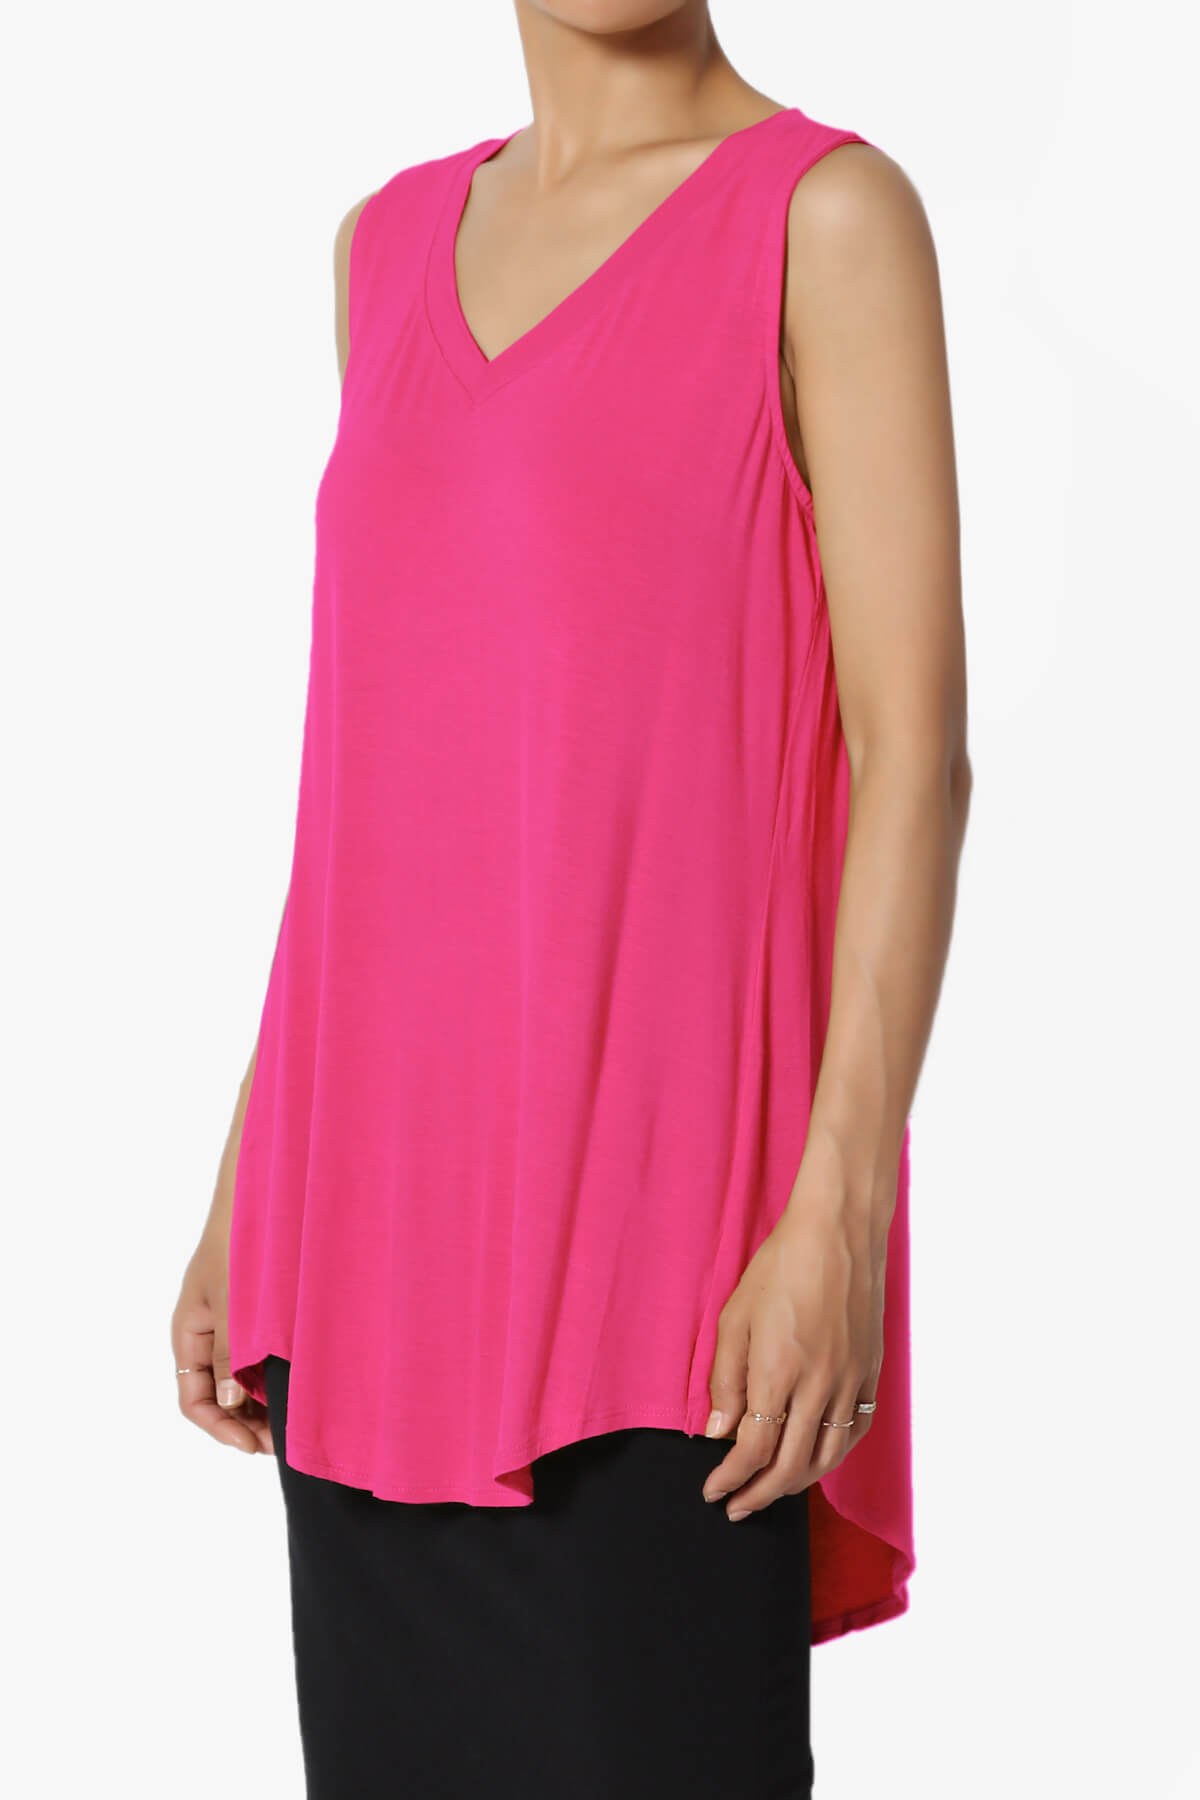 Myles Sleeveless V-Neck Luxe Jersey Top HOT PINK_3